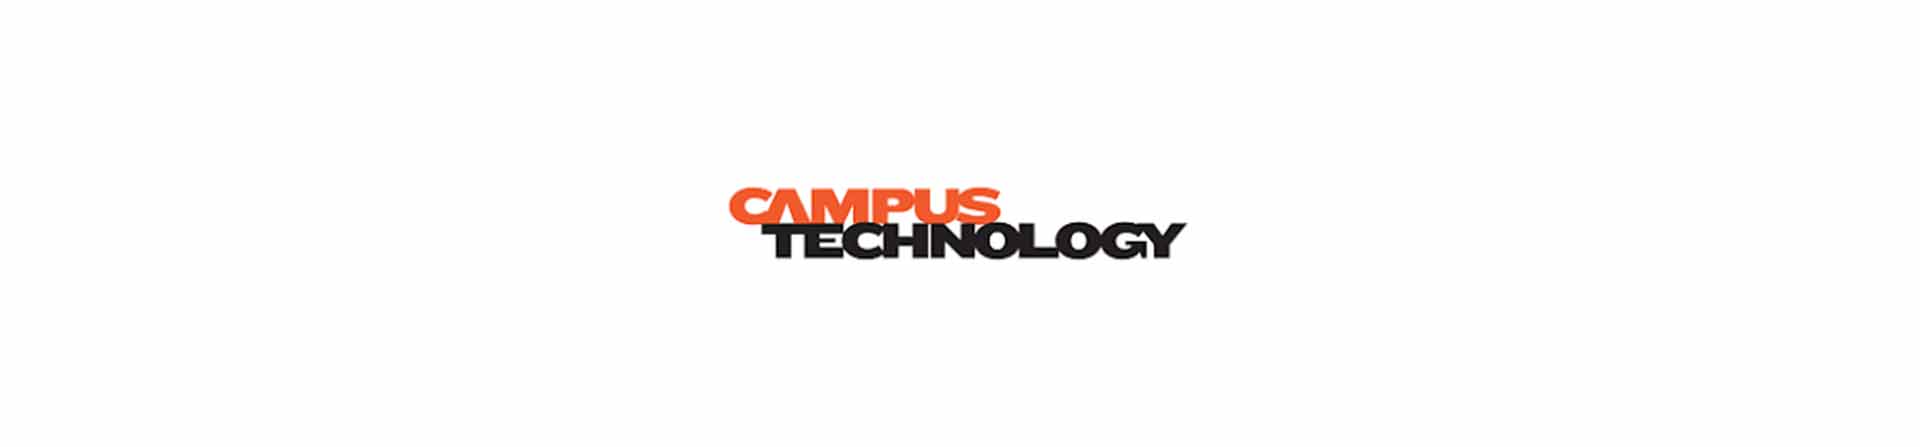 In The News Featured - Campus Technology Magazine